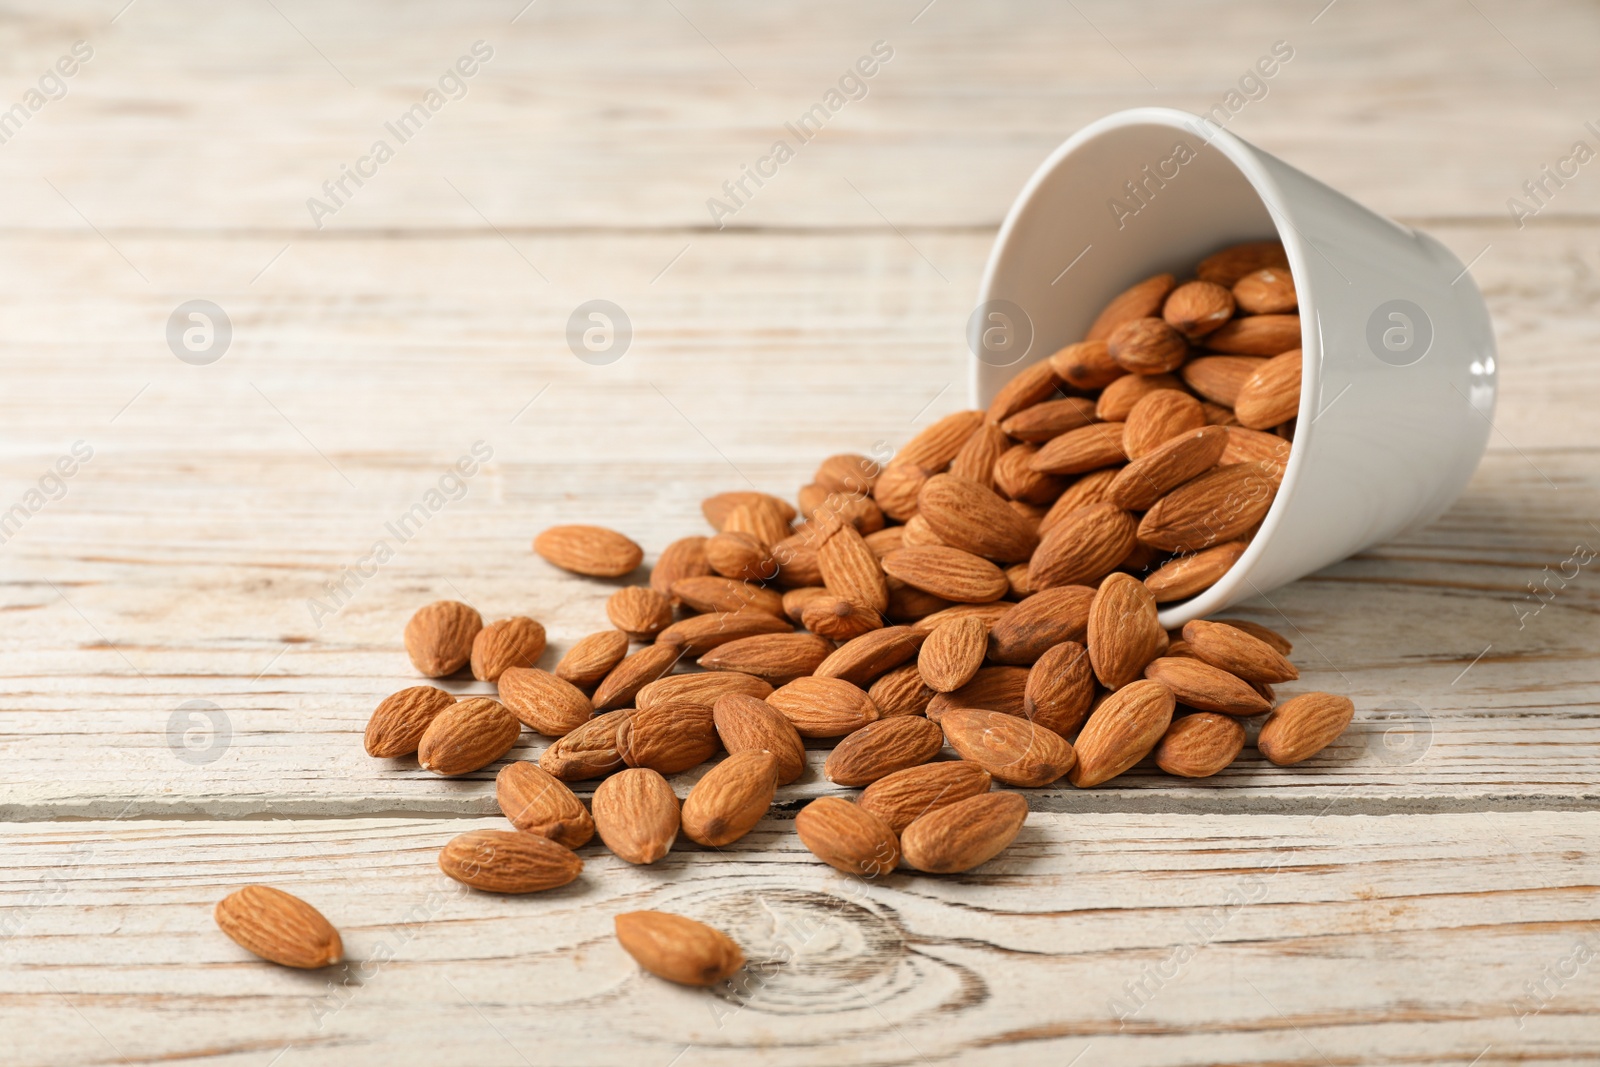 Photo of Tasty organic almond nuts and bowl on table